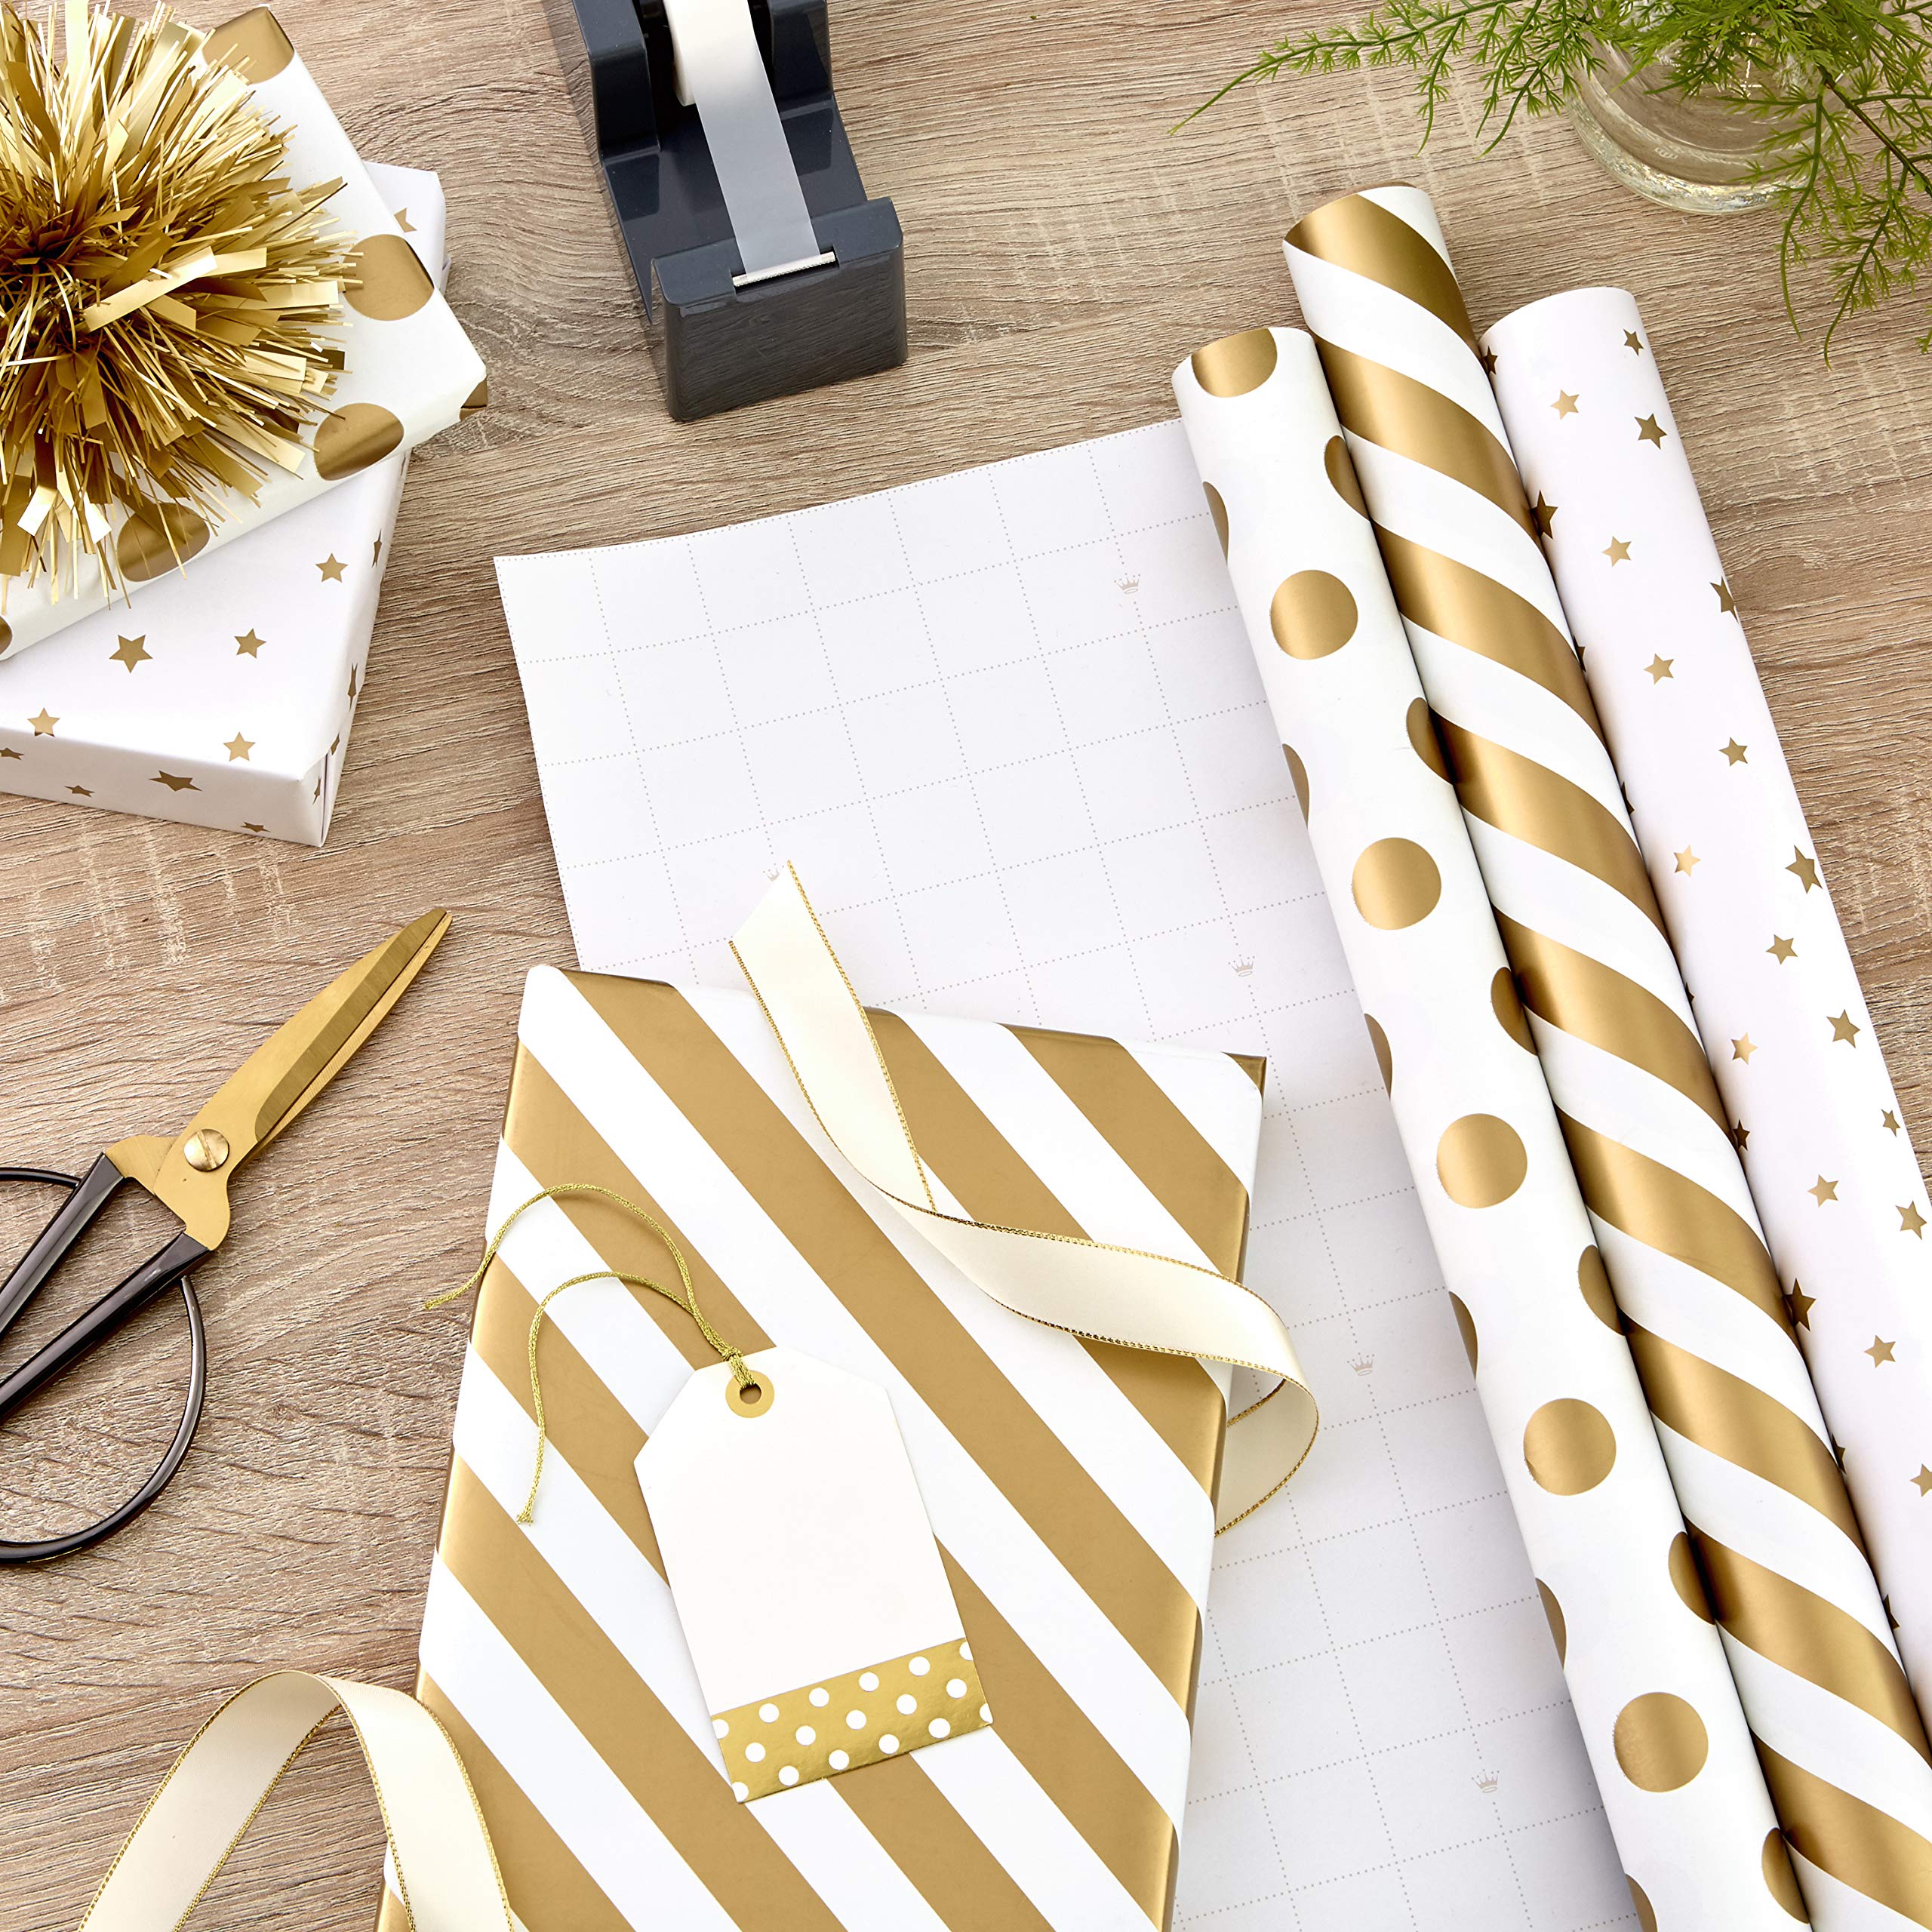 Hallmark Gold and White Wrapping Paper with Cutlines on Reverse (3 Rolls: 105 sq. ft. ttl) for Birthdays, Weddings, Christmas, Hanukkah, Graduations, Engagements, Bridal Showers